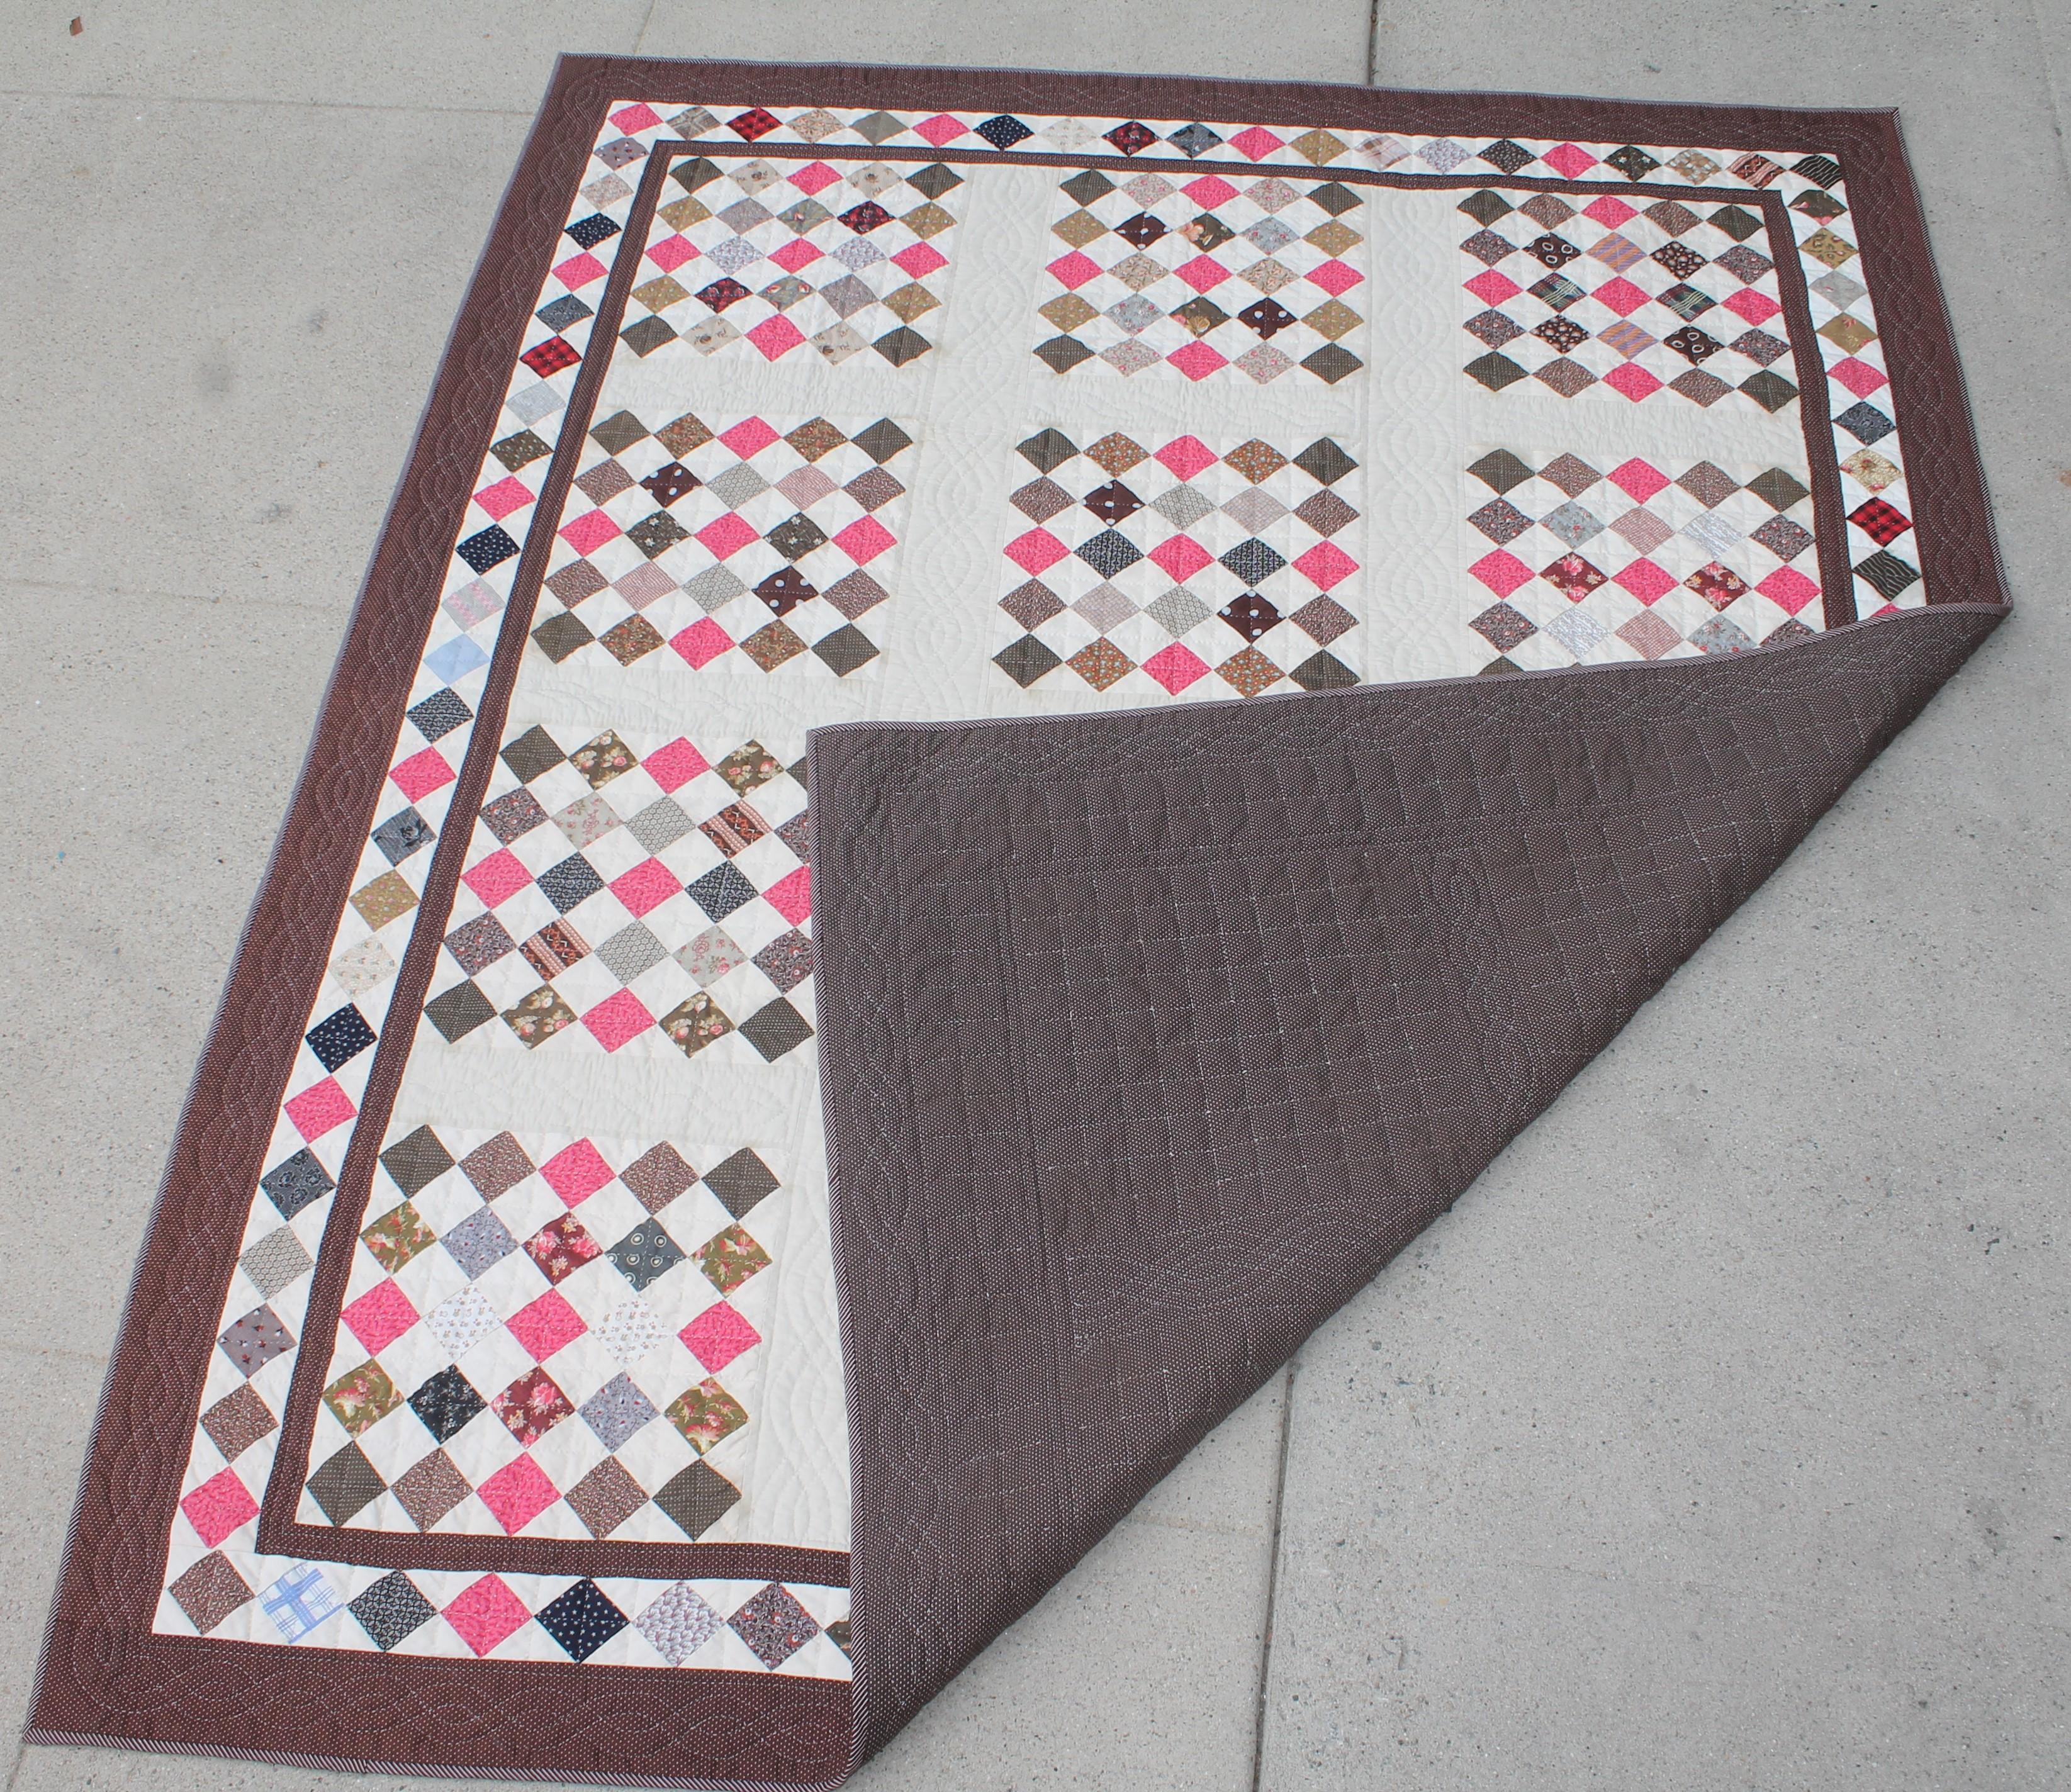 This folky contained one patch quilt is in mint condition and has a wonderful diamond block border.The condition is pristine.